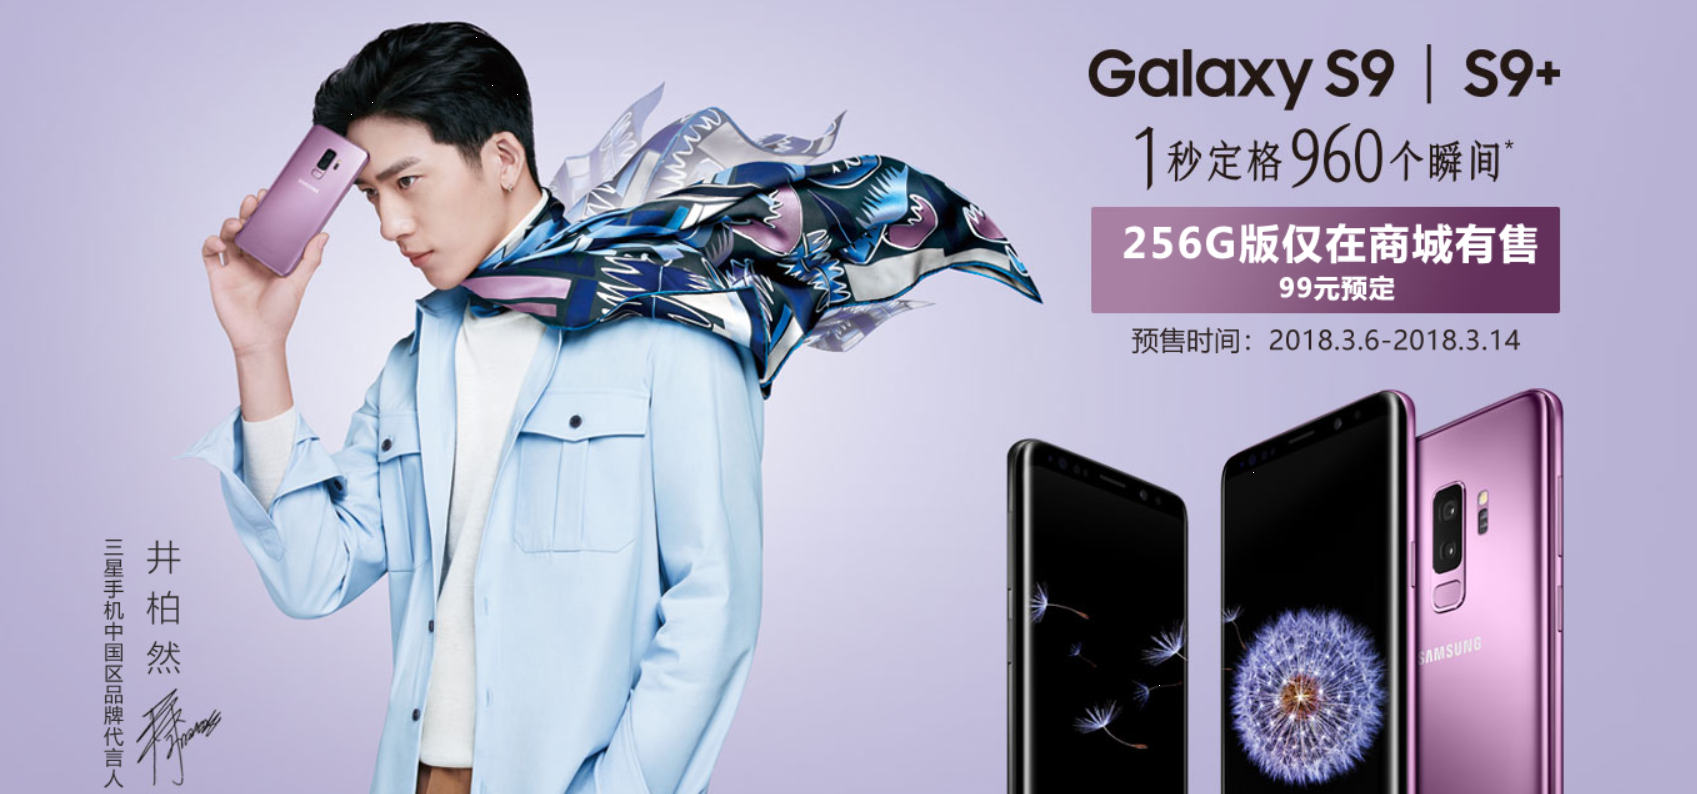 Galaxy S9+ China featured